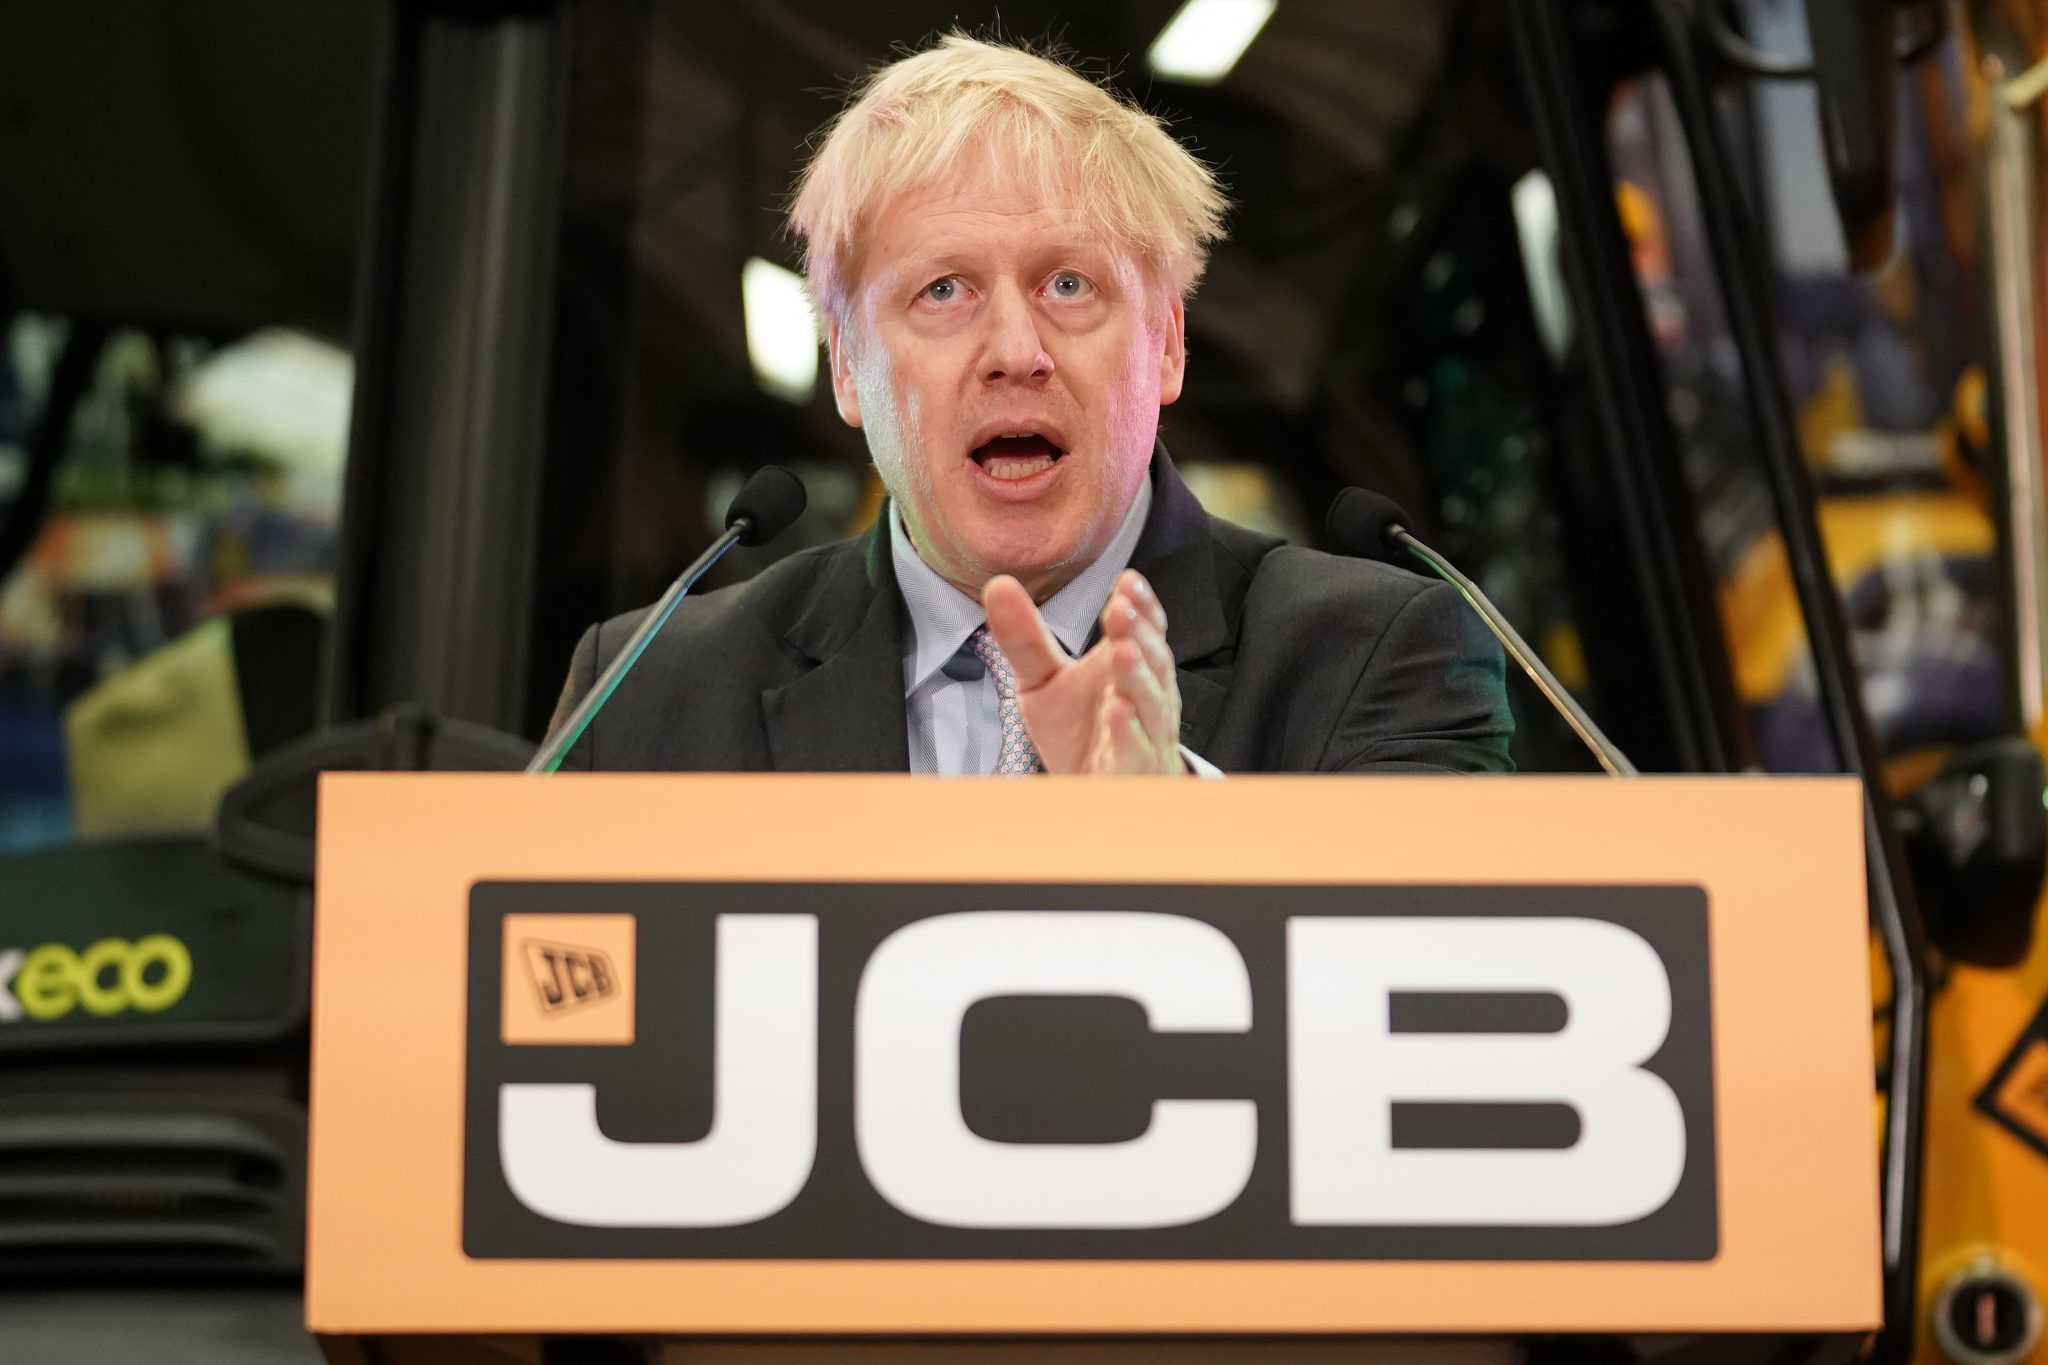 Boris Johnson delivers a speech at JCB World Headquarters on January 18, 2019 in Rocester, Staffordshire. After defeating a vote of no confidence in her government, Theresa May has called on MPs to break the Brexit deadlock by conducting cross-party Brexit talks. The speech by the former Foreign Secretary is being widely acknowledged as a Tory leadership bid. (Photo by Christopher Furlong/Getty Images)